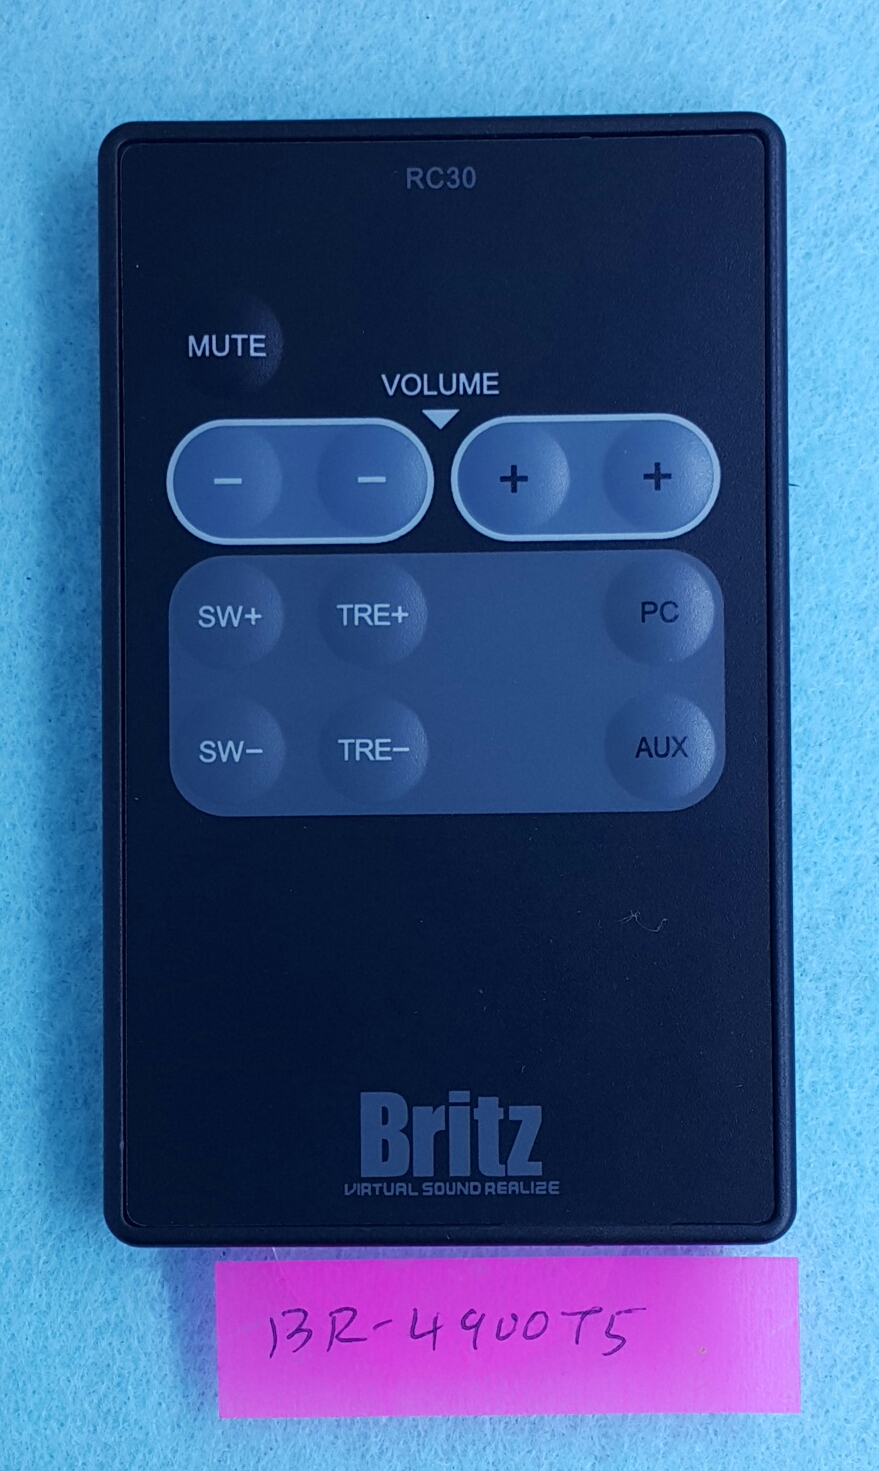 BRITZ_BR-4900T5-브리츠_AUDIO_cover.png